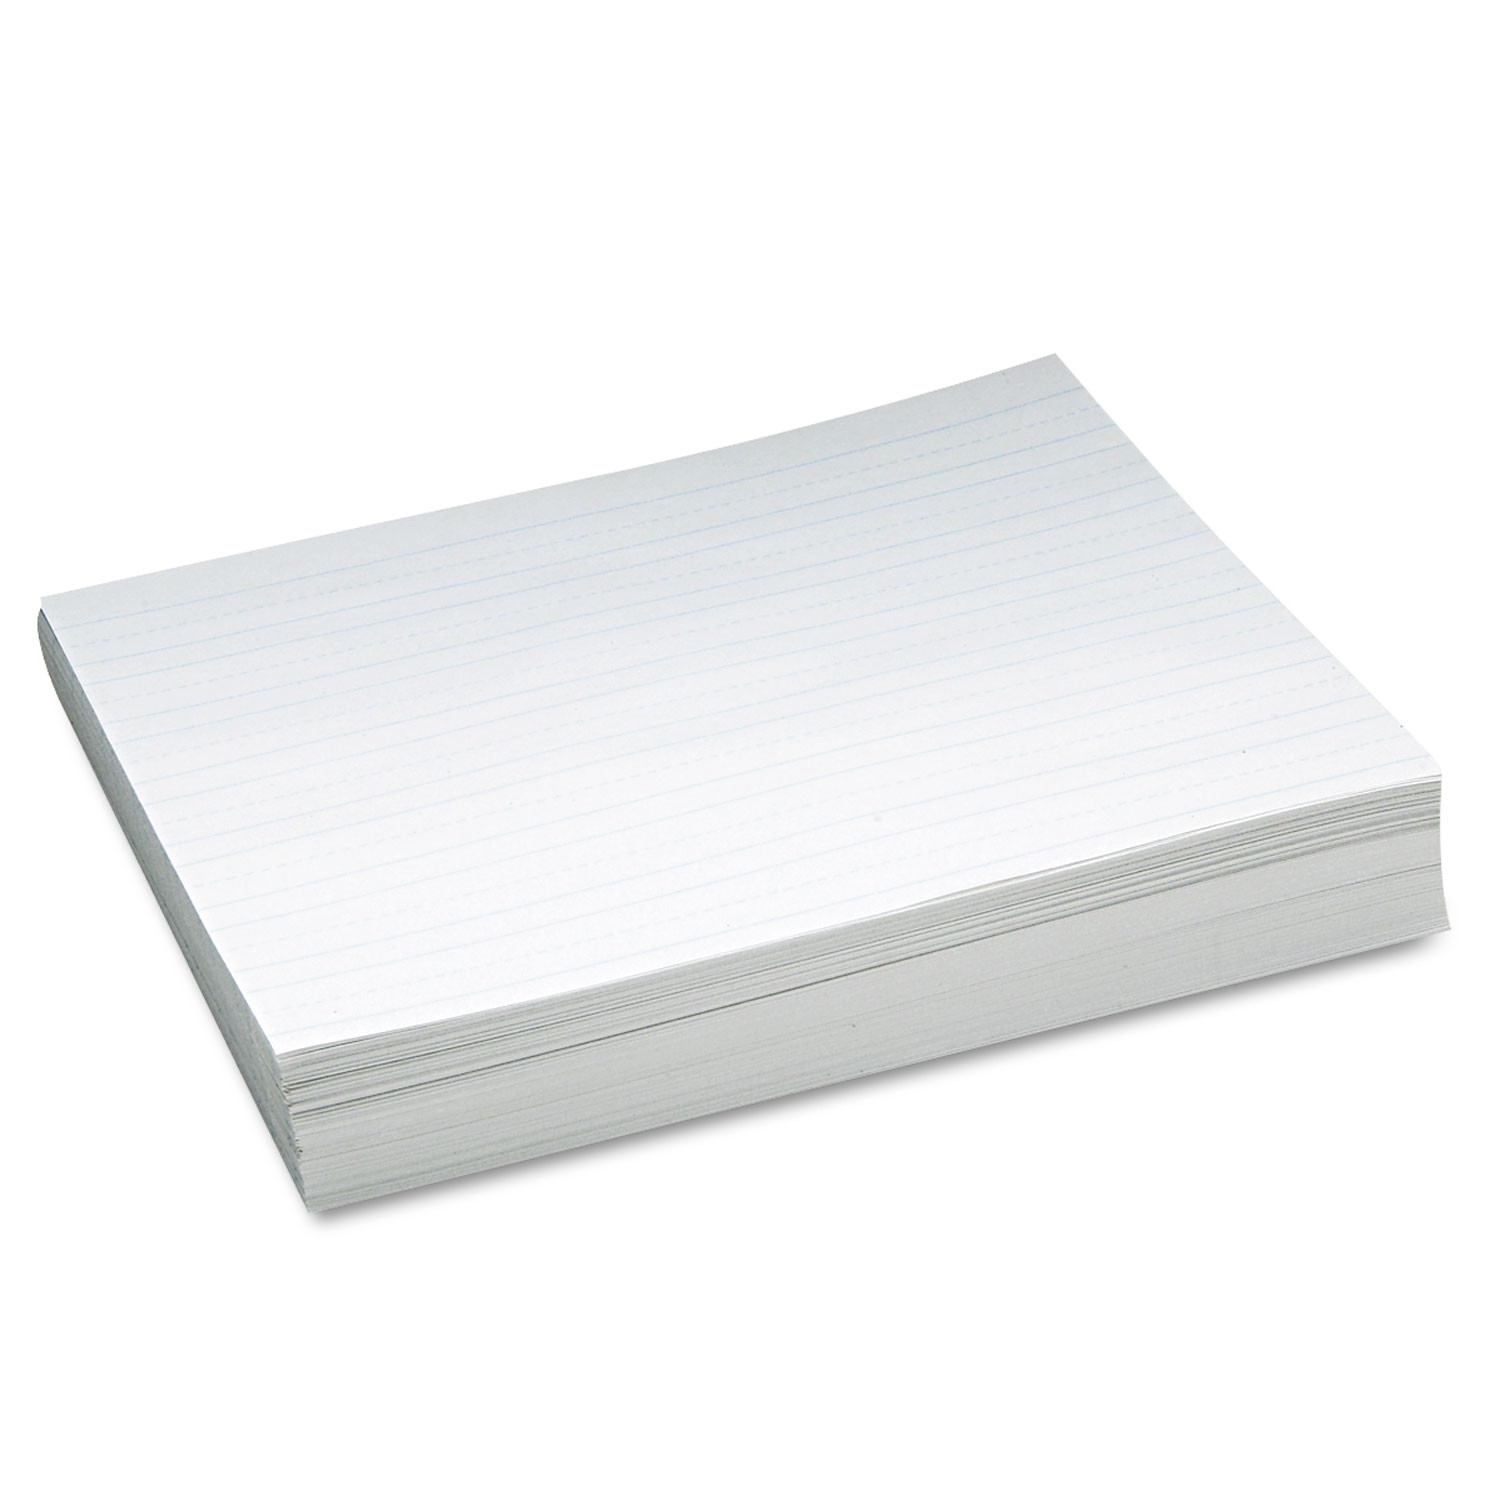  Pacon 2635 Skip-A-Line Ruled Newsprint Paper, 3/4 Two-Sided Long Rule, 8.5 x 11, 500/Pack (PAC2635) 